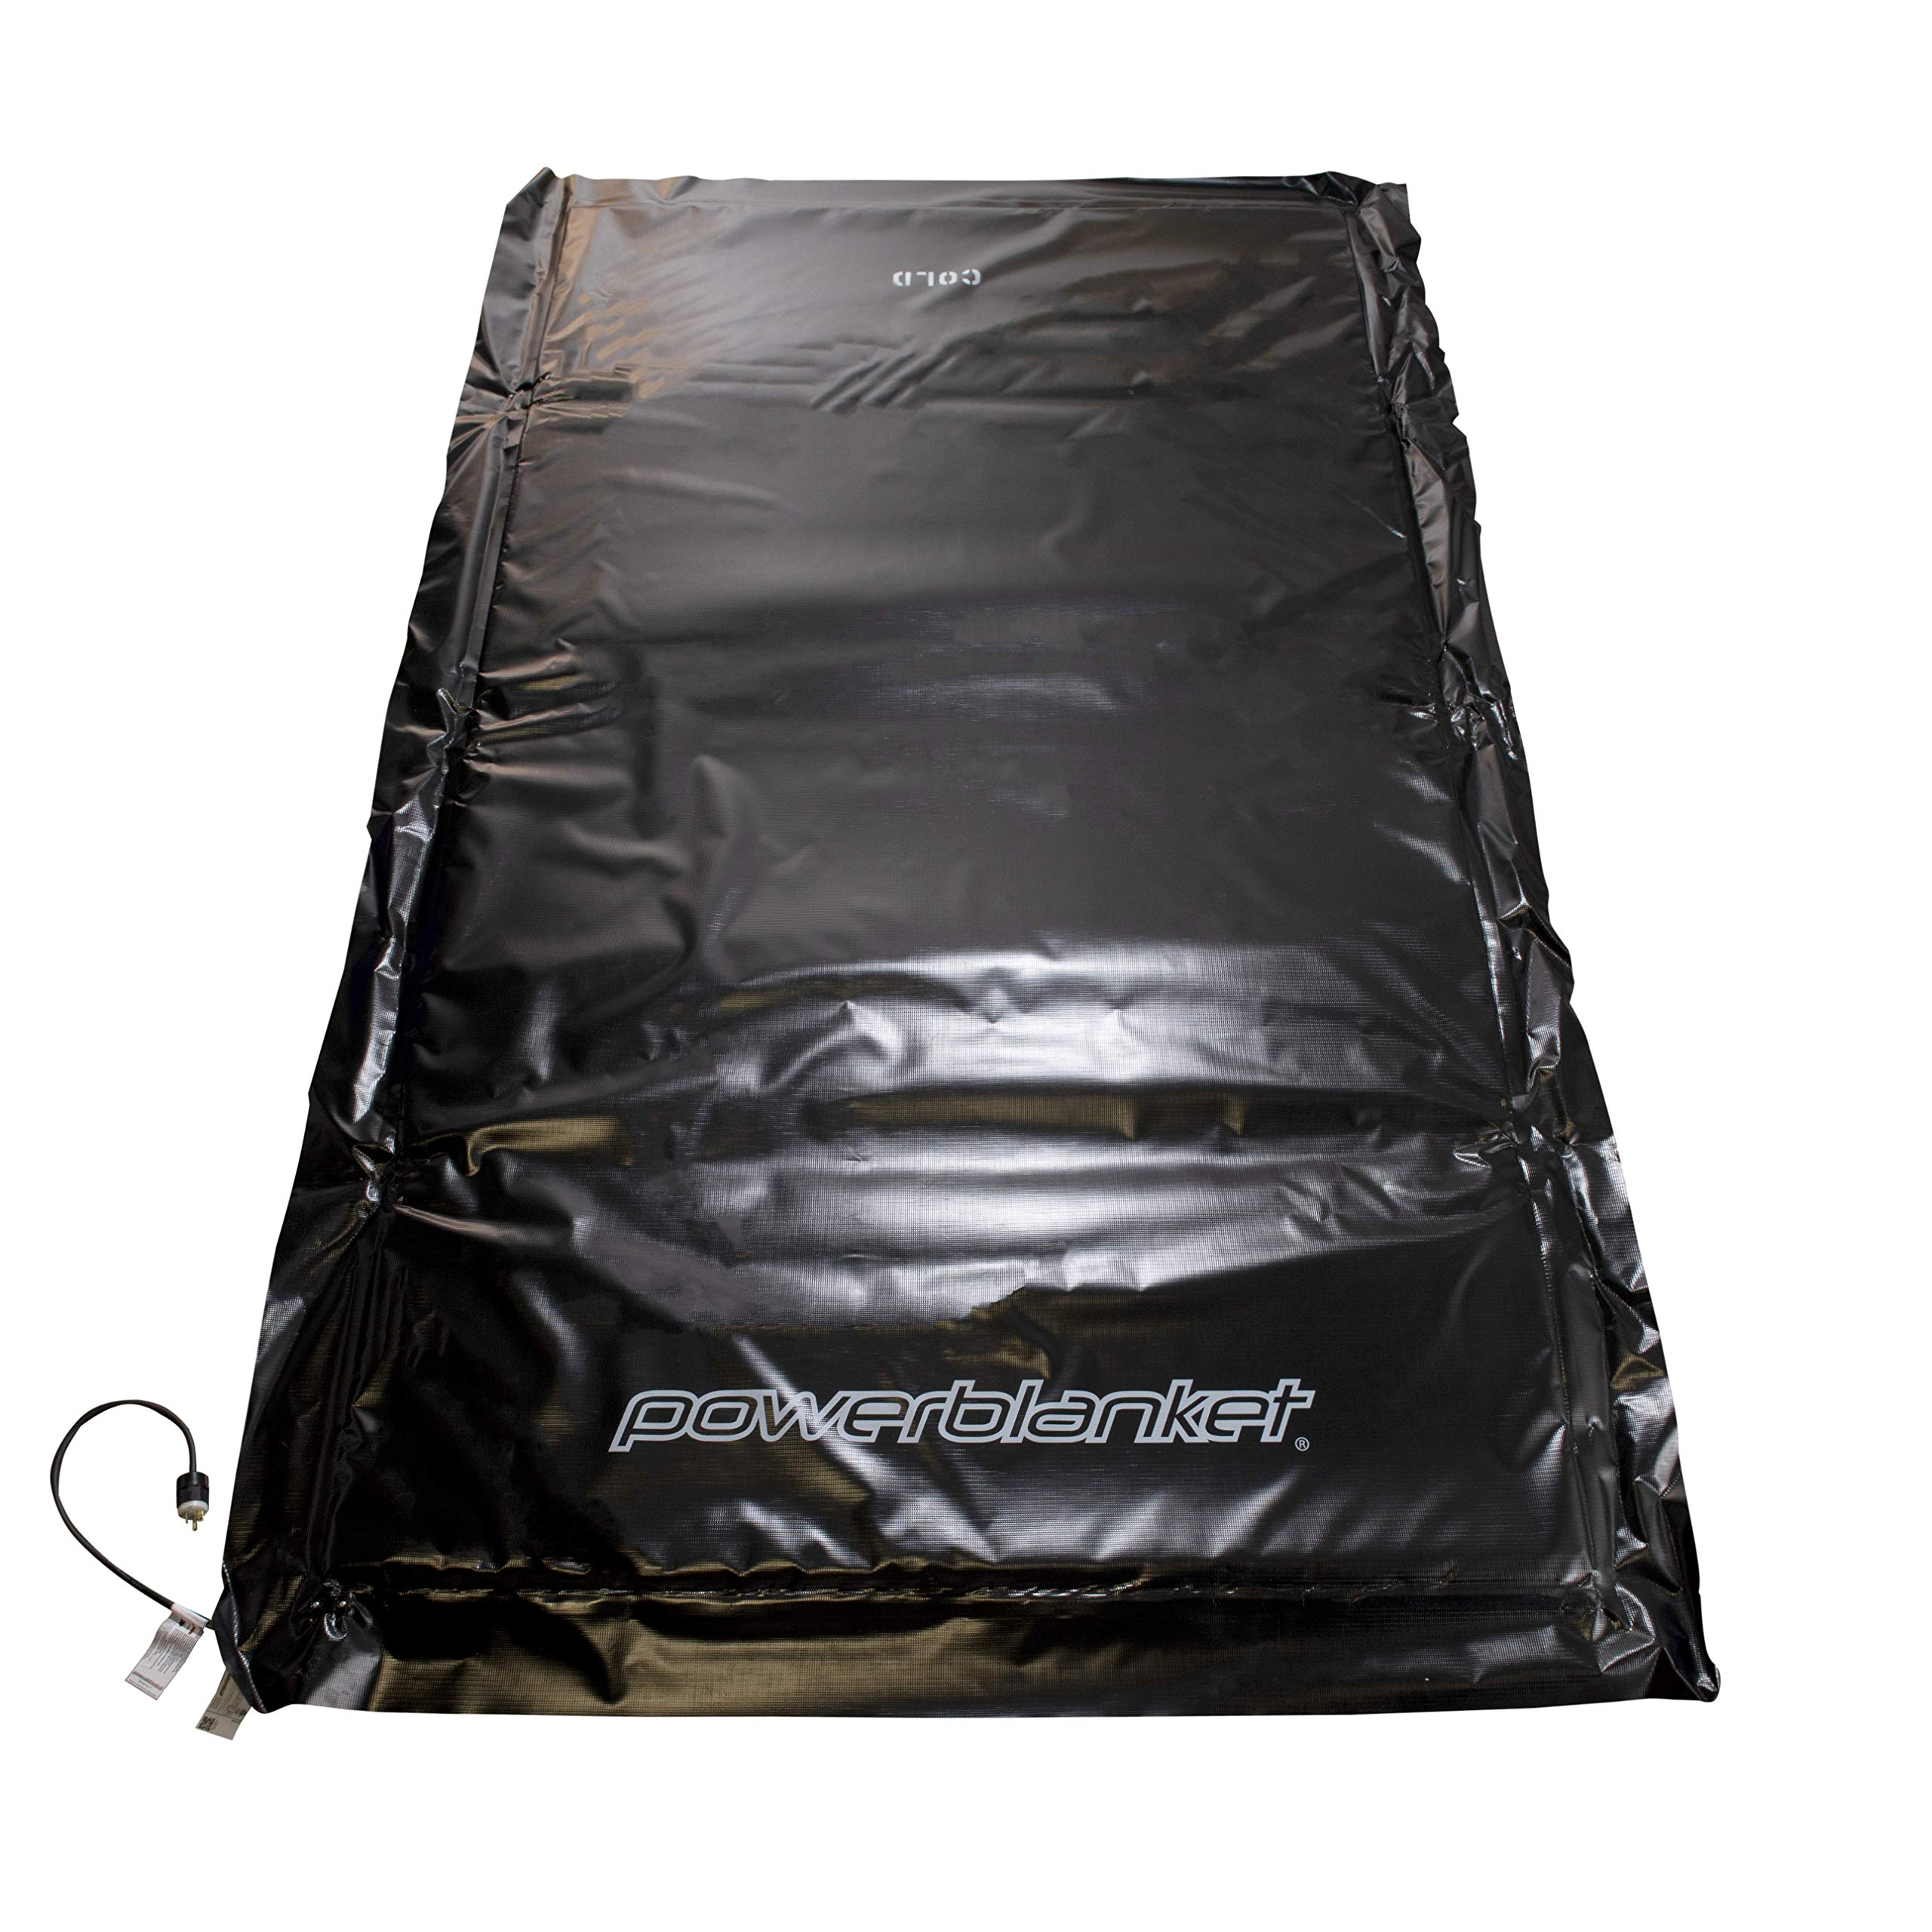 Powerblanket MD0304 Heated Concrete Blanket - 3' x 4' Heated Dimensions - 4' x 5' Finished Dimensions